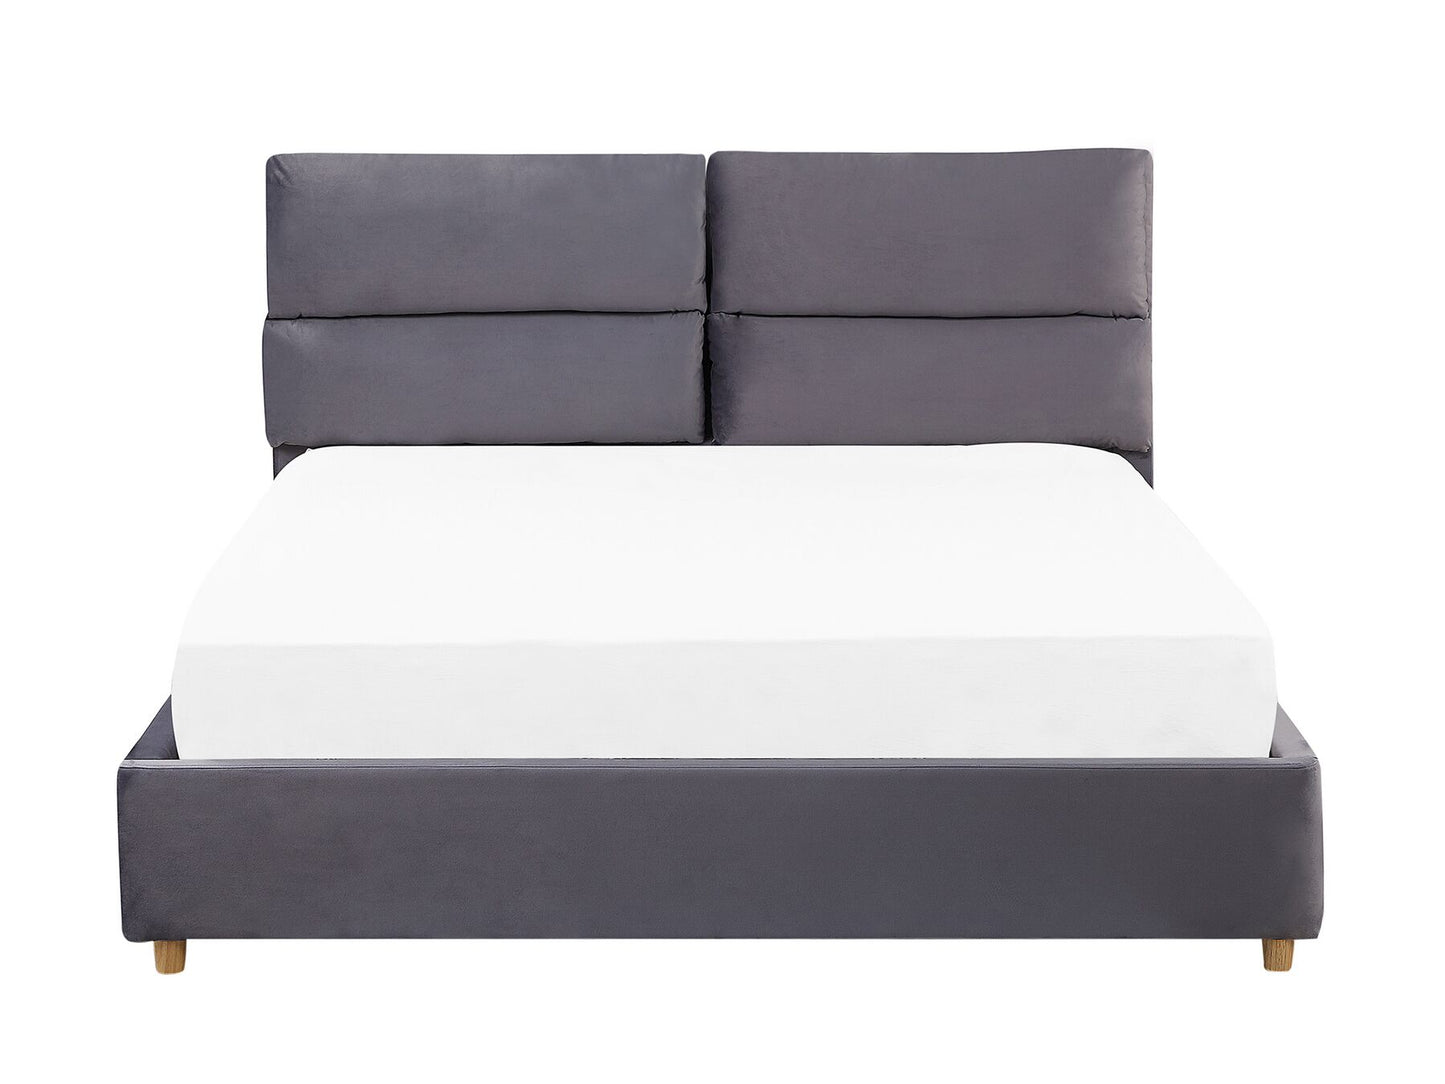 Bality Fully Upholstered Bed without Storage